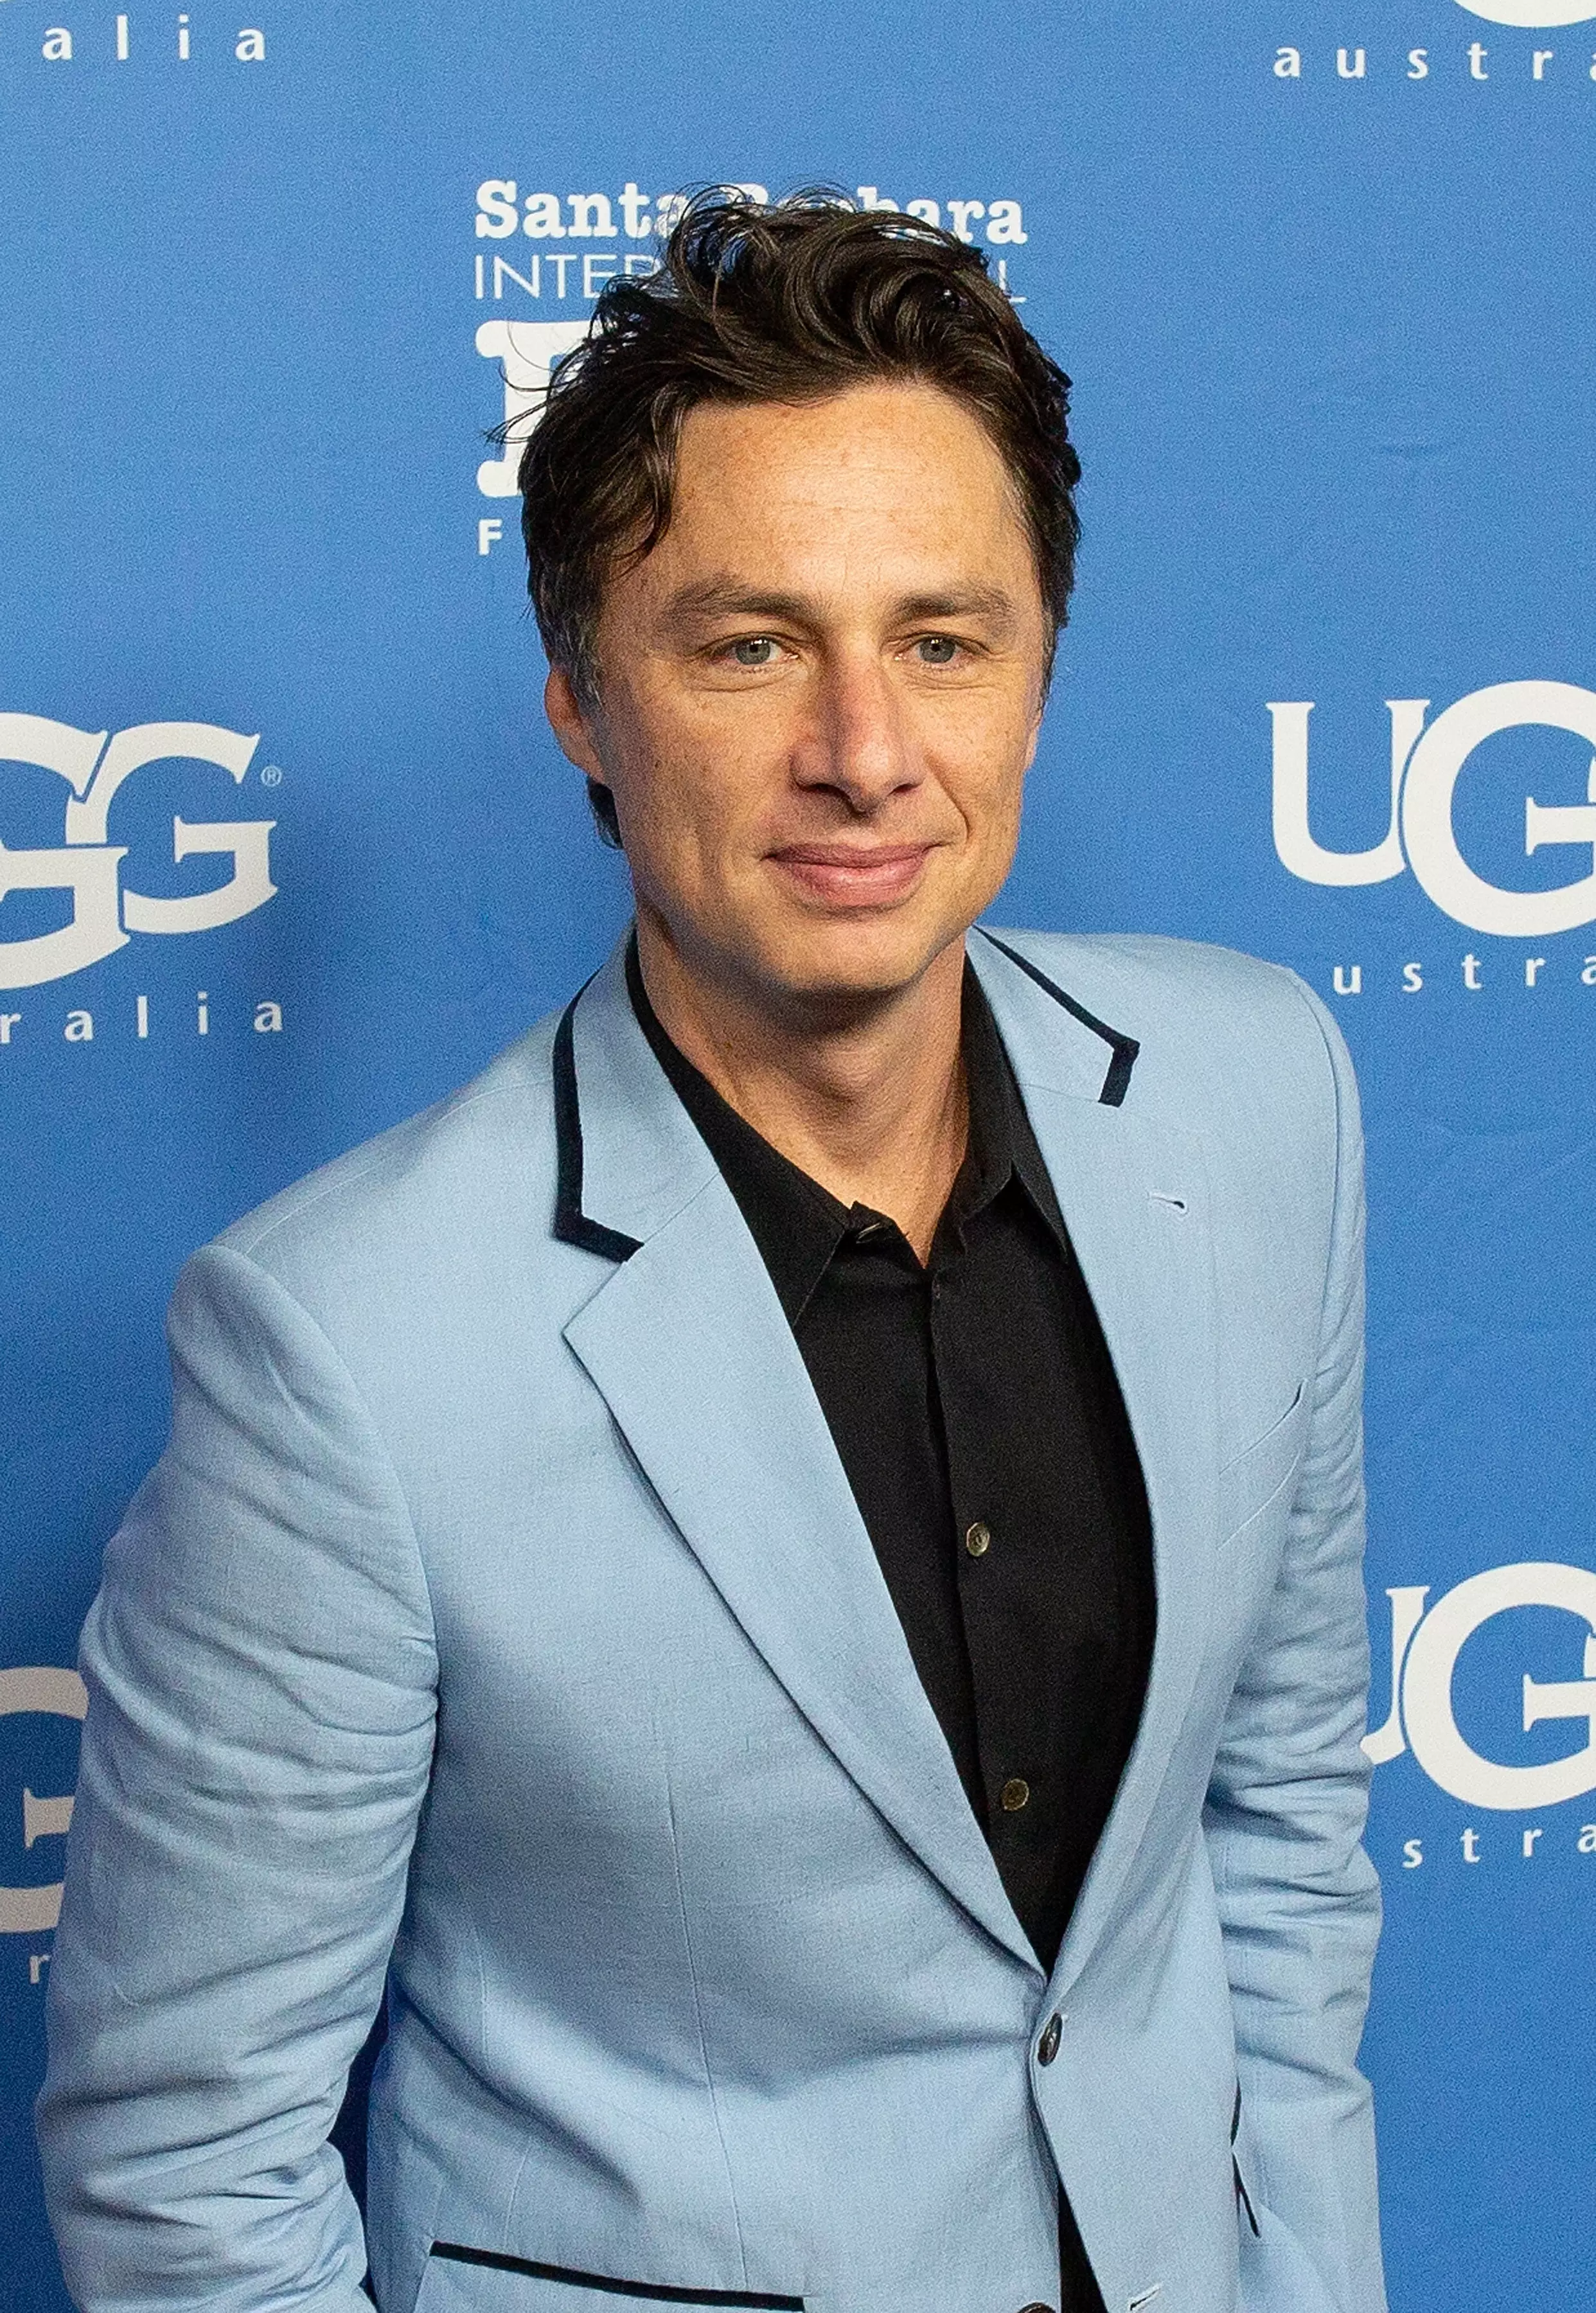 Zach Braff says it was a 'bummer' the controversy appeared to affect the reception to his film.